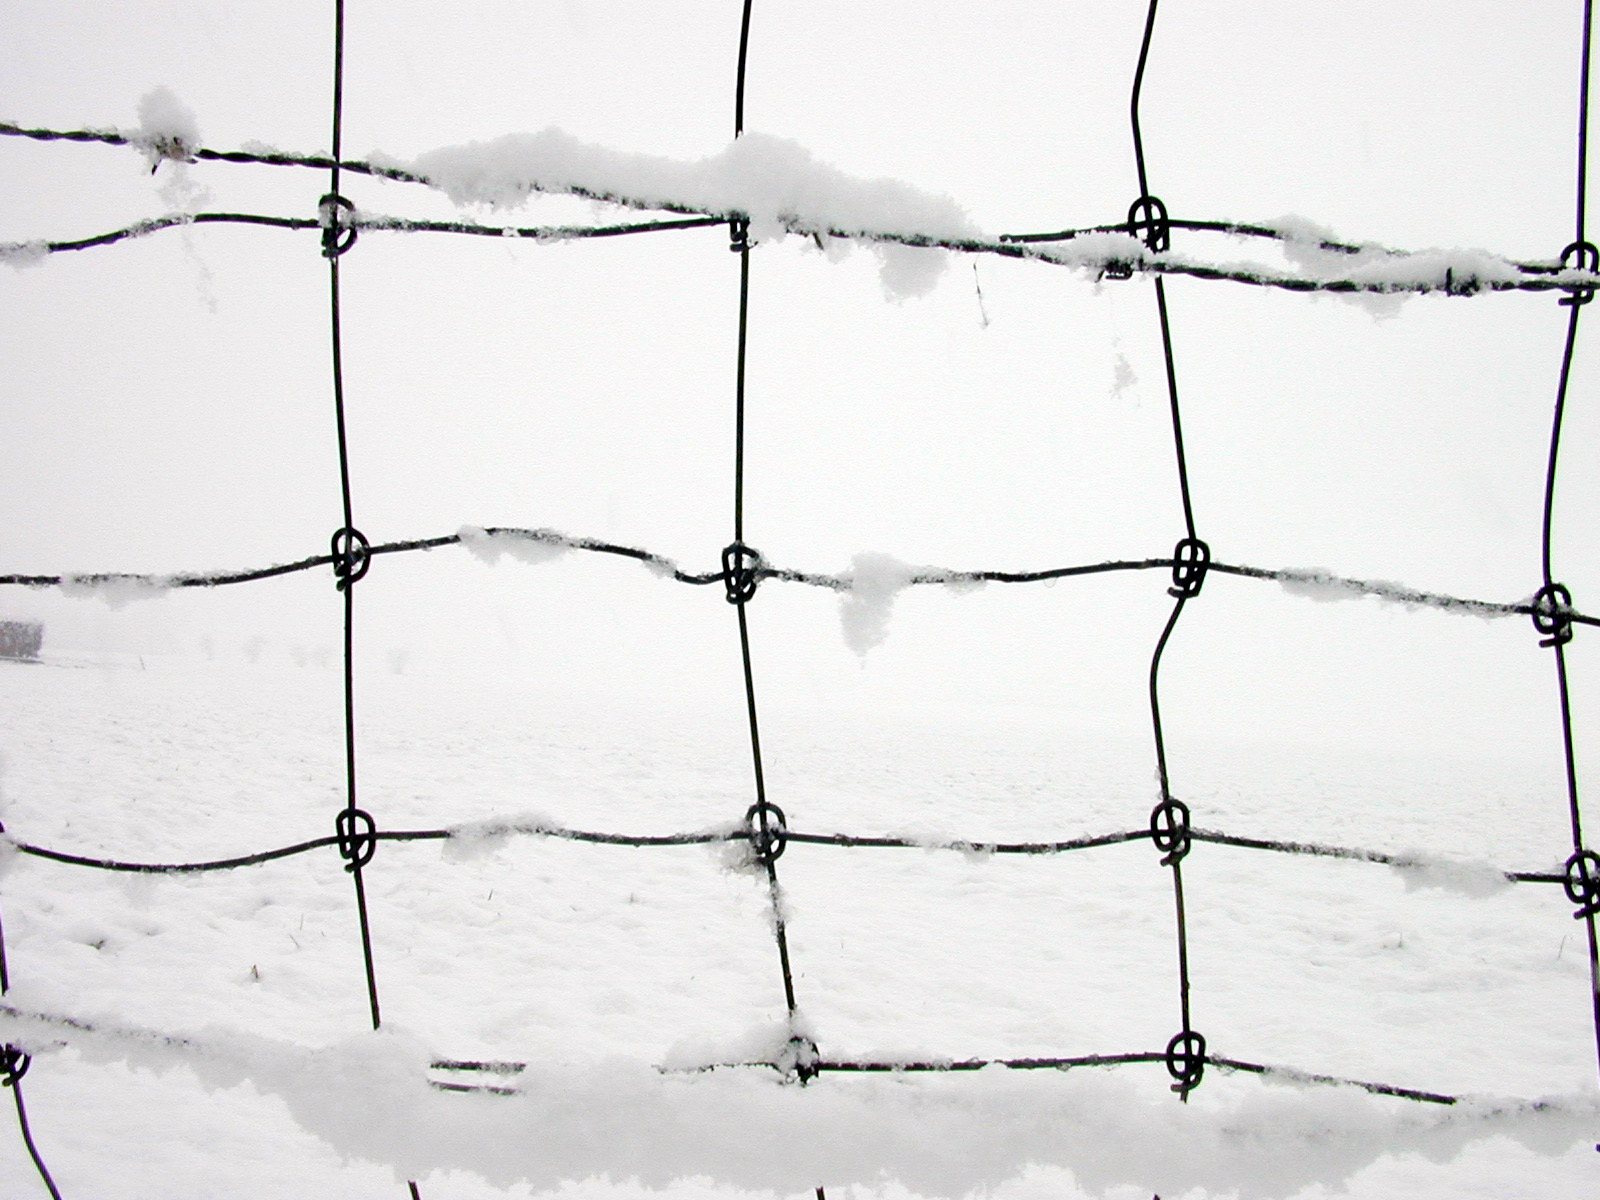 net fence wires knots snow field cold blanket